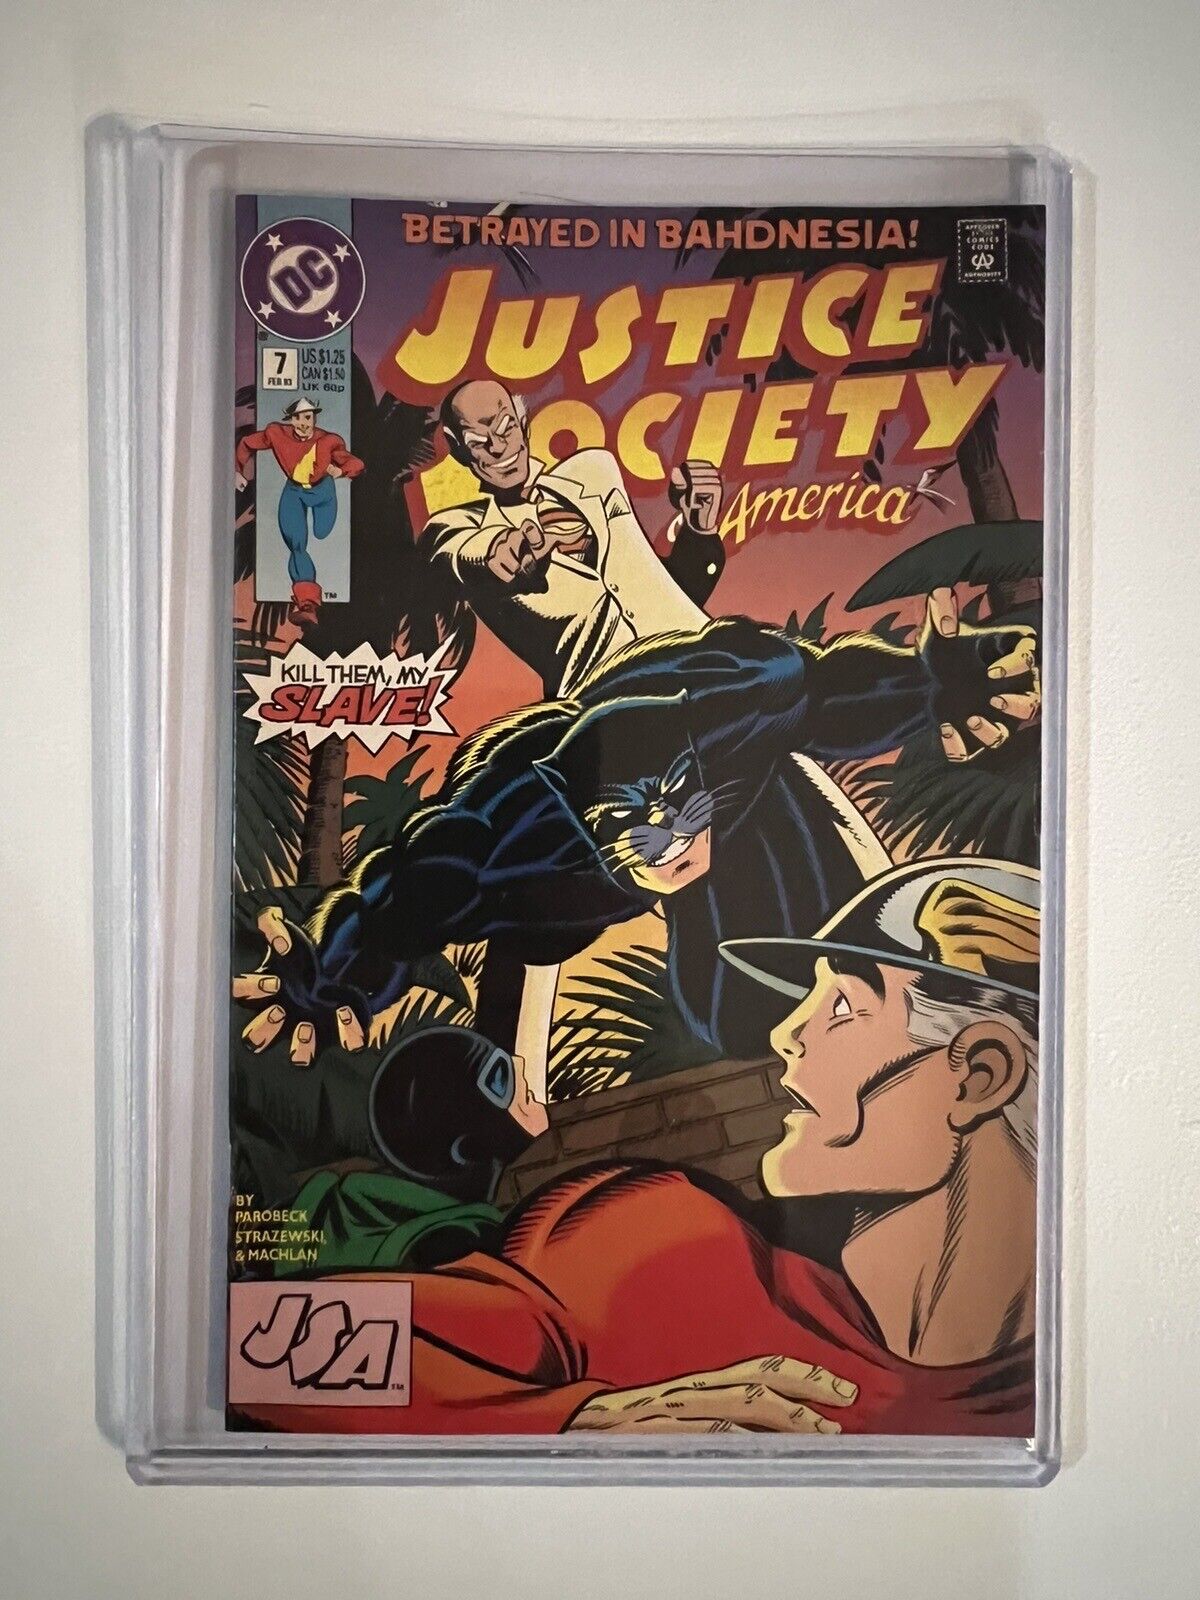 Justice Society America #7 NM Condition, Original Owner.